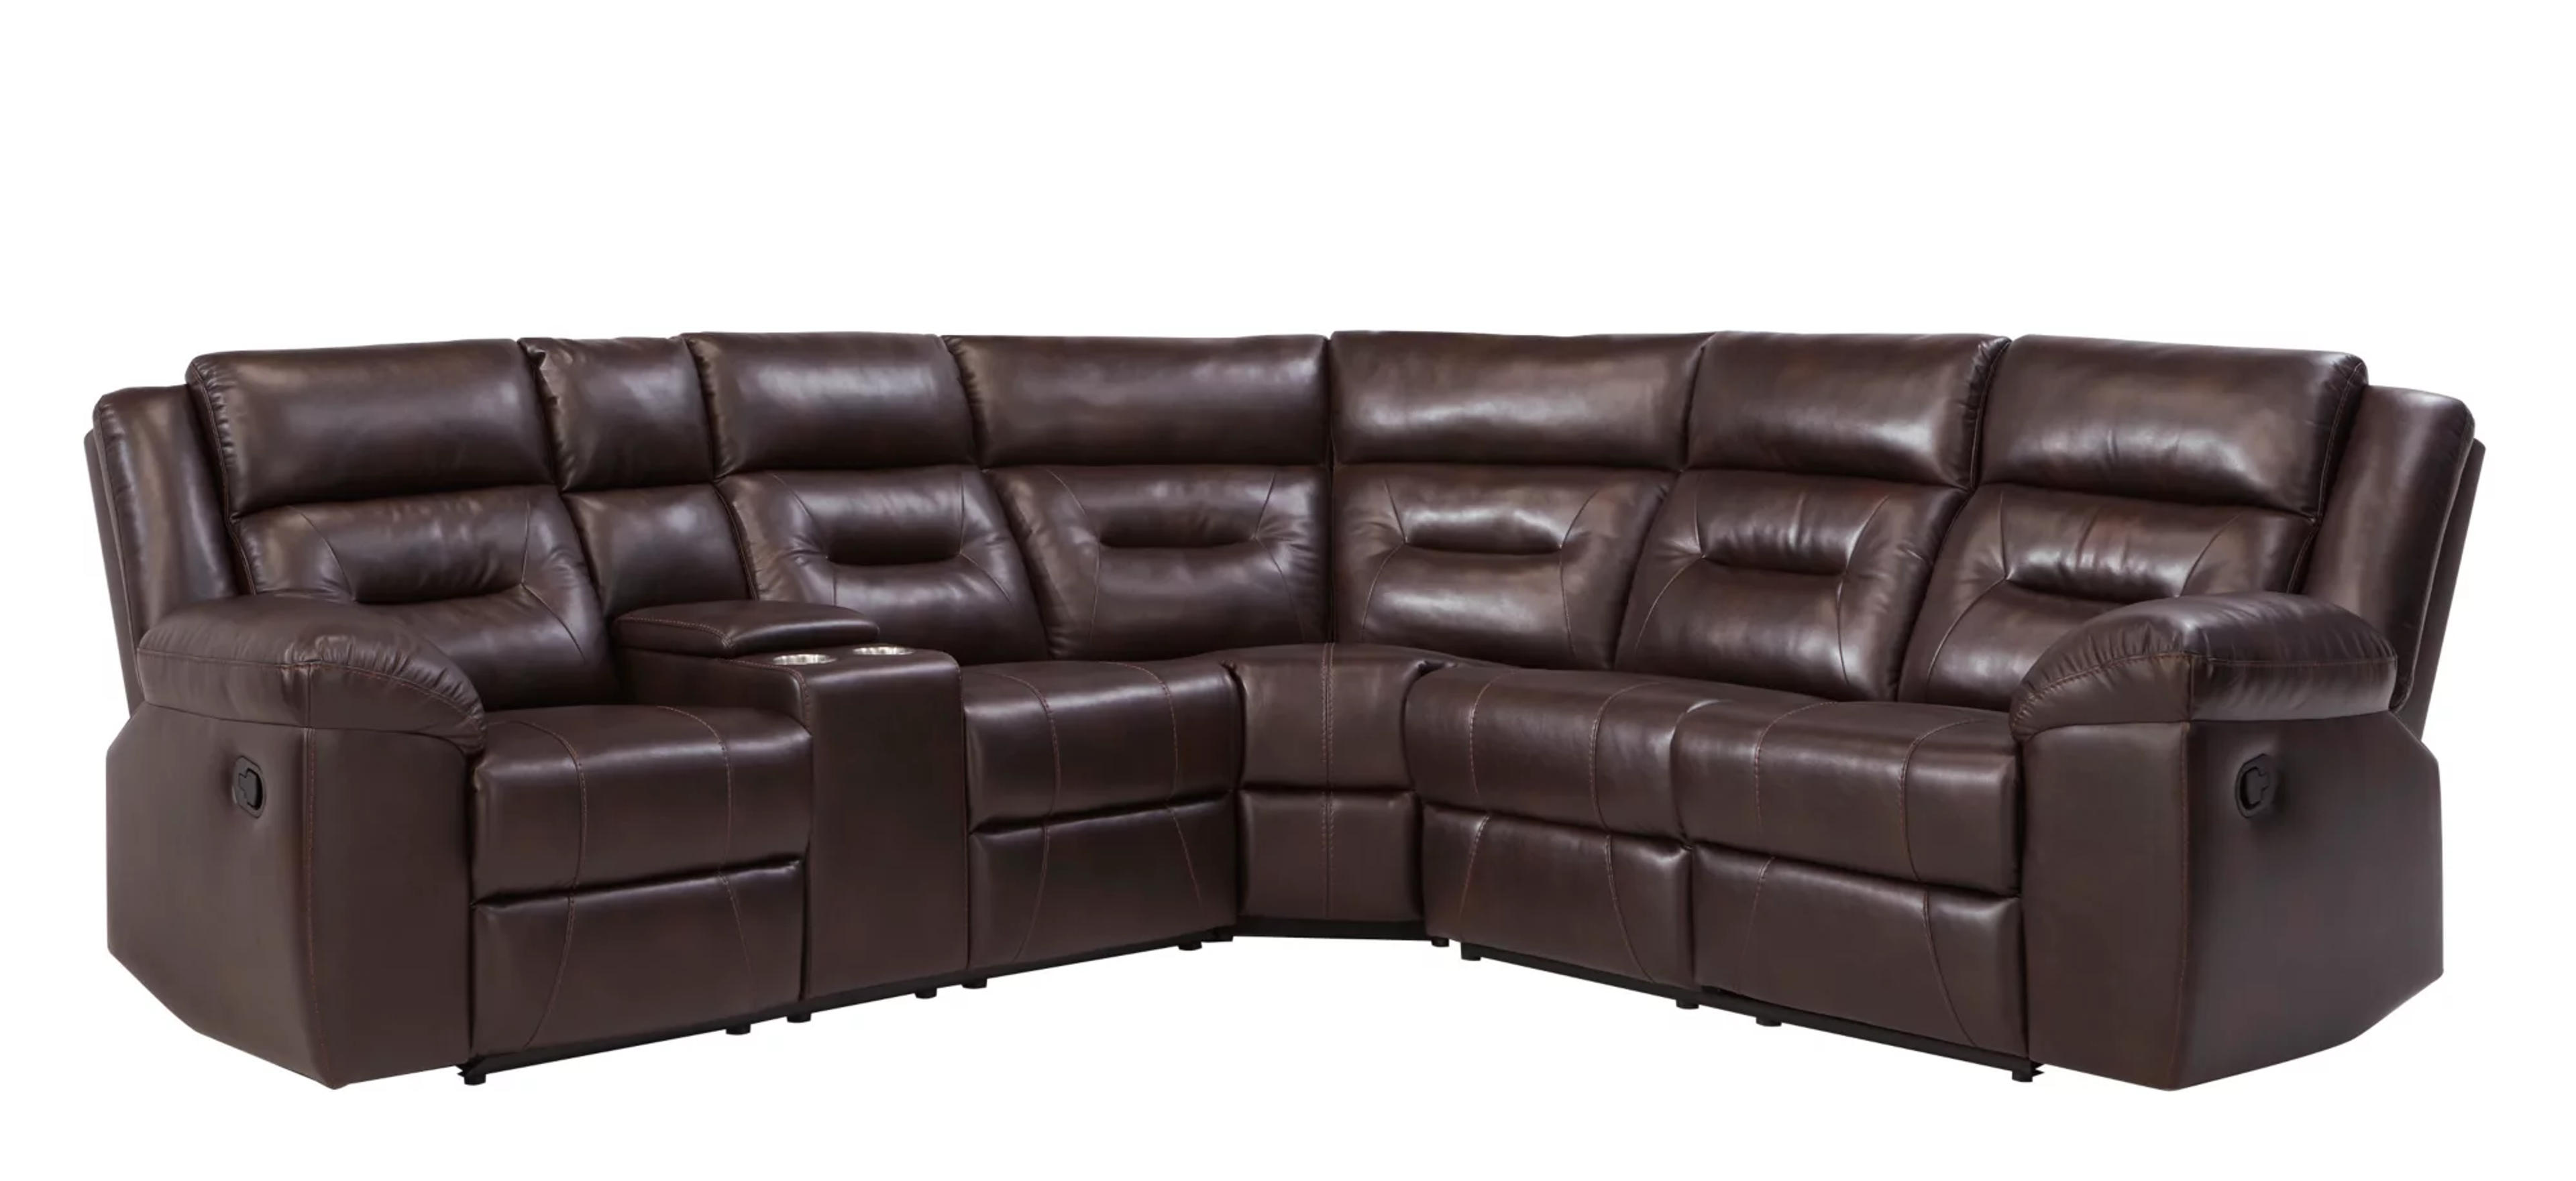 Telcatto 3-pc. Reclining Sectional | Raymour & Flanigan